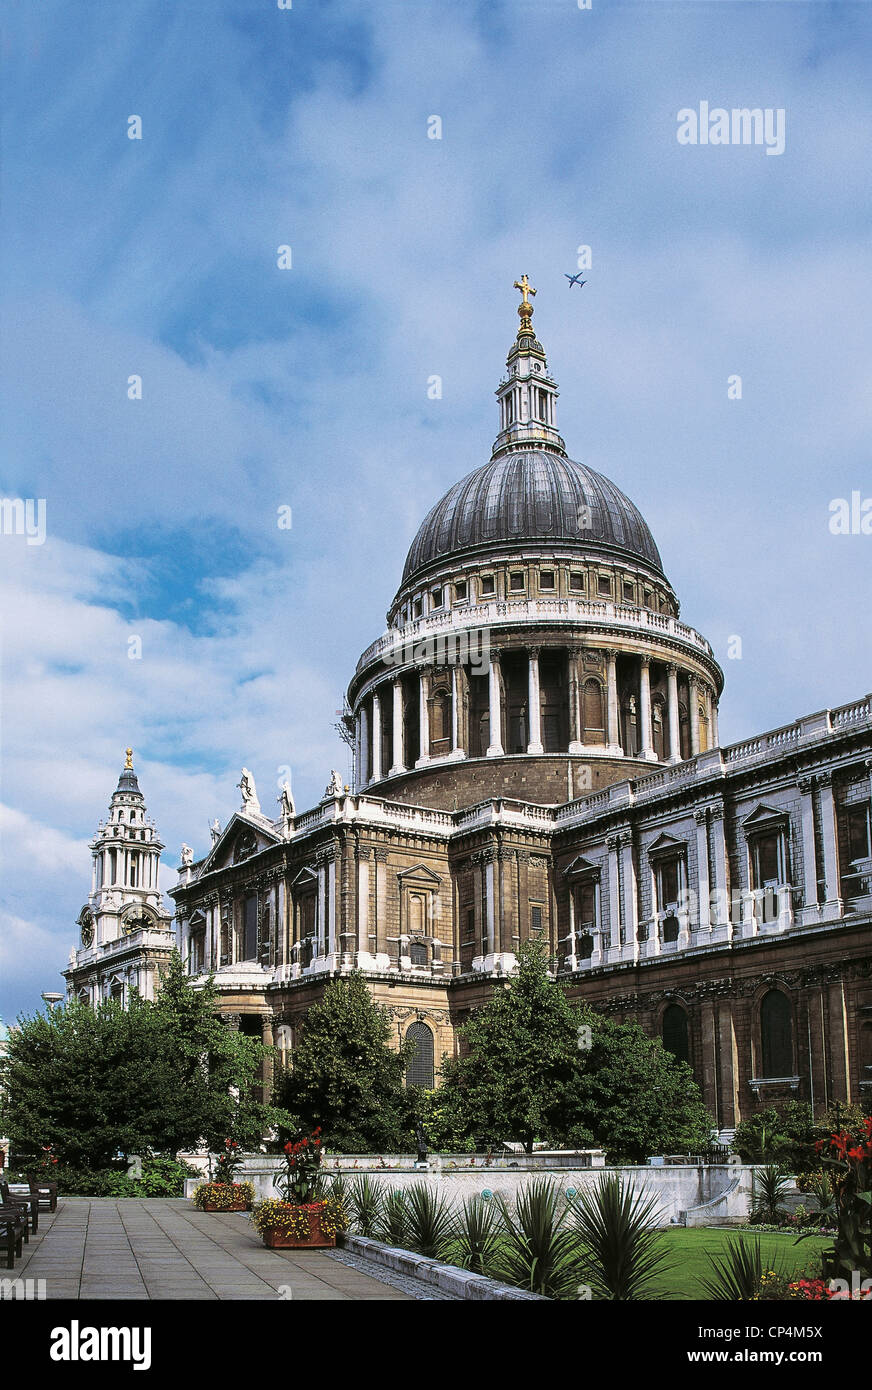 UK, England. LONDON, St Paul's Cathedral (1675-1710) Stock Photo